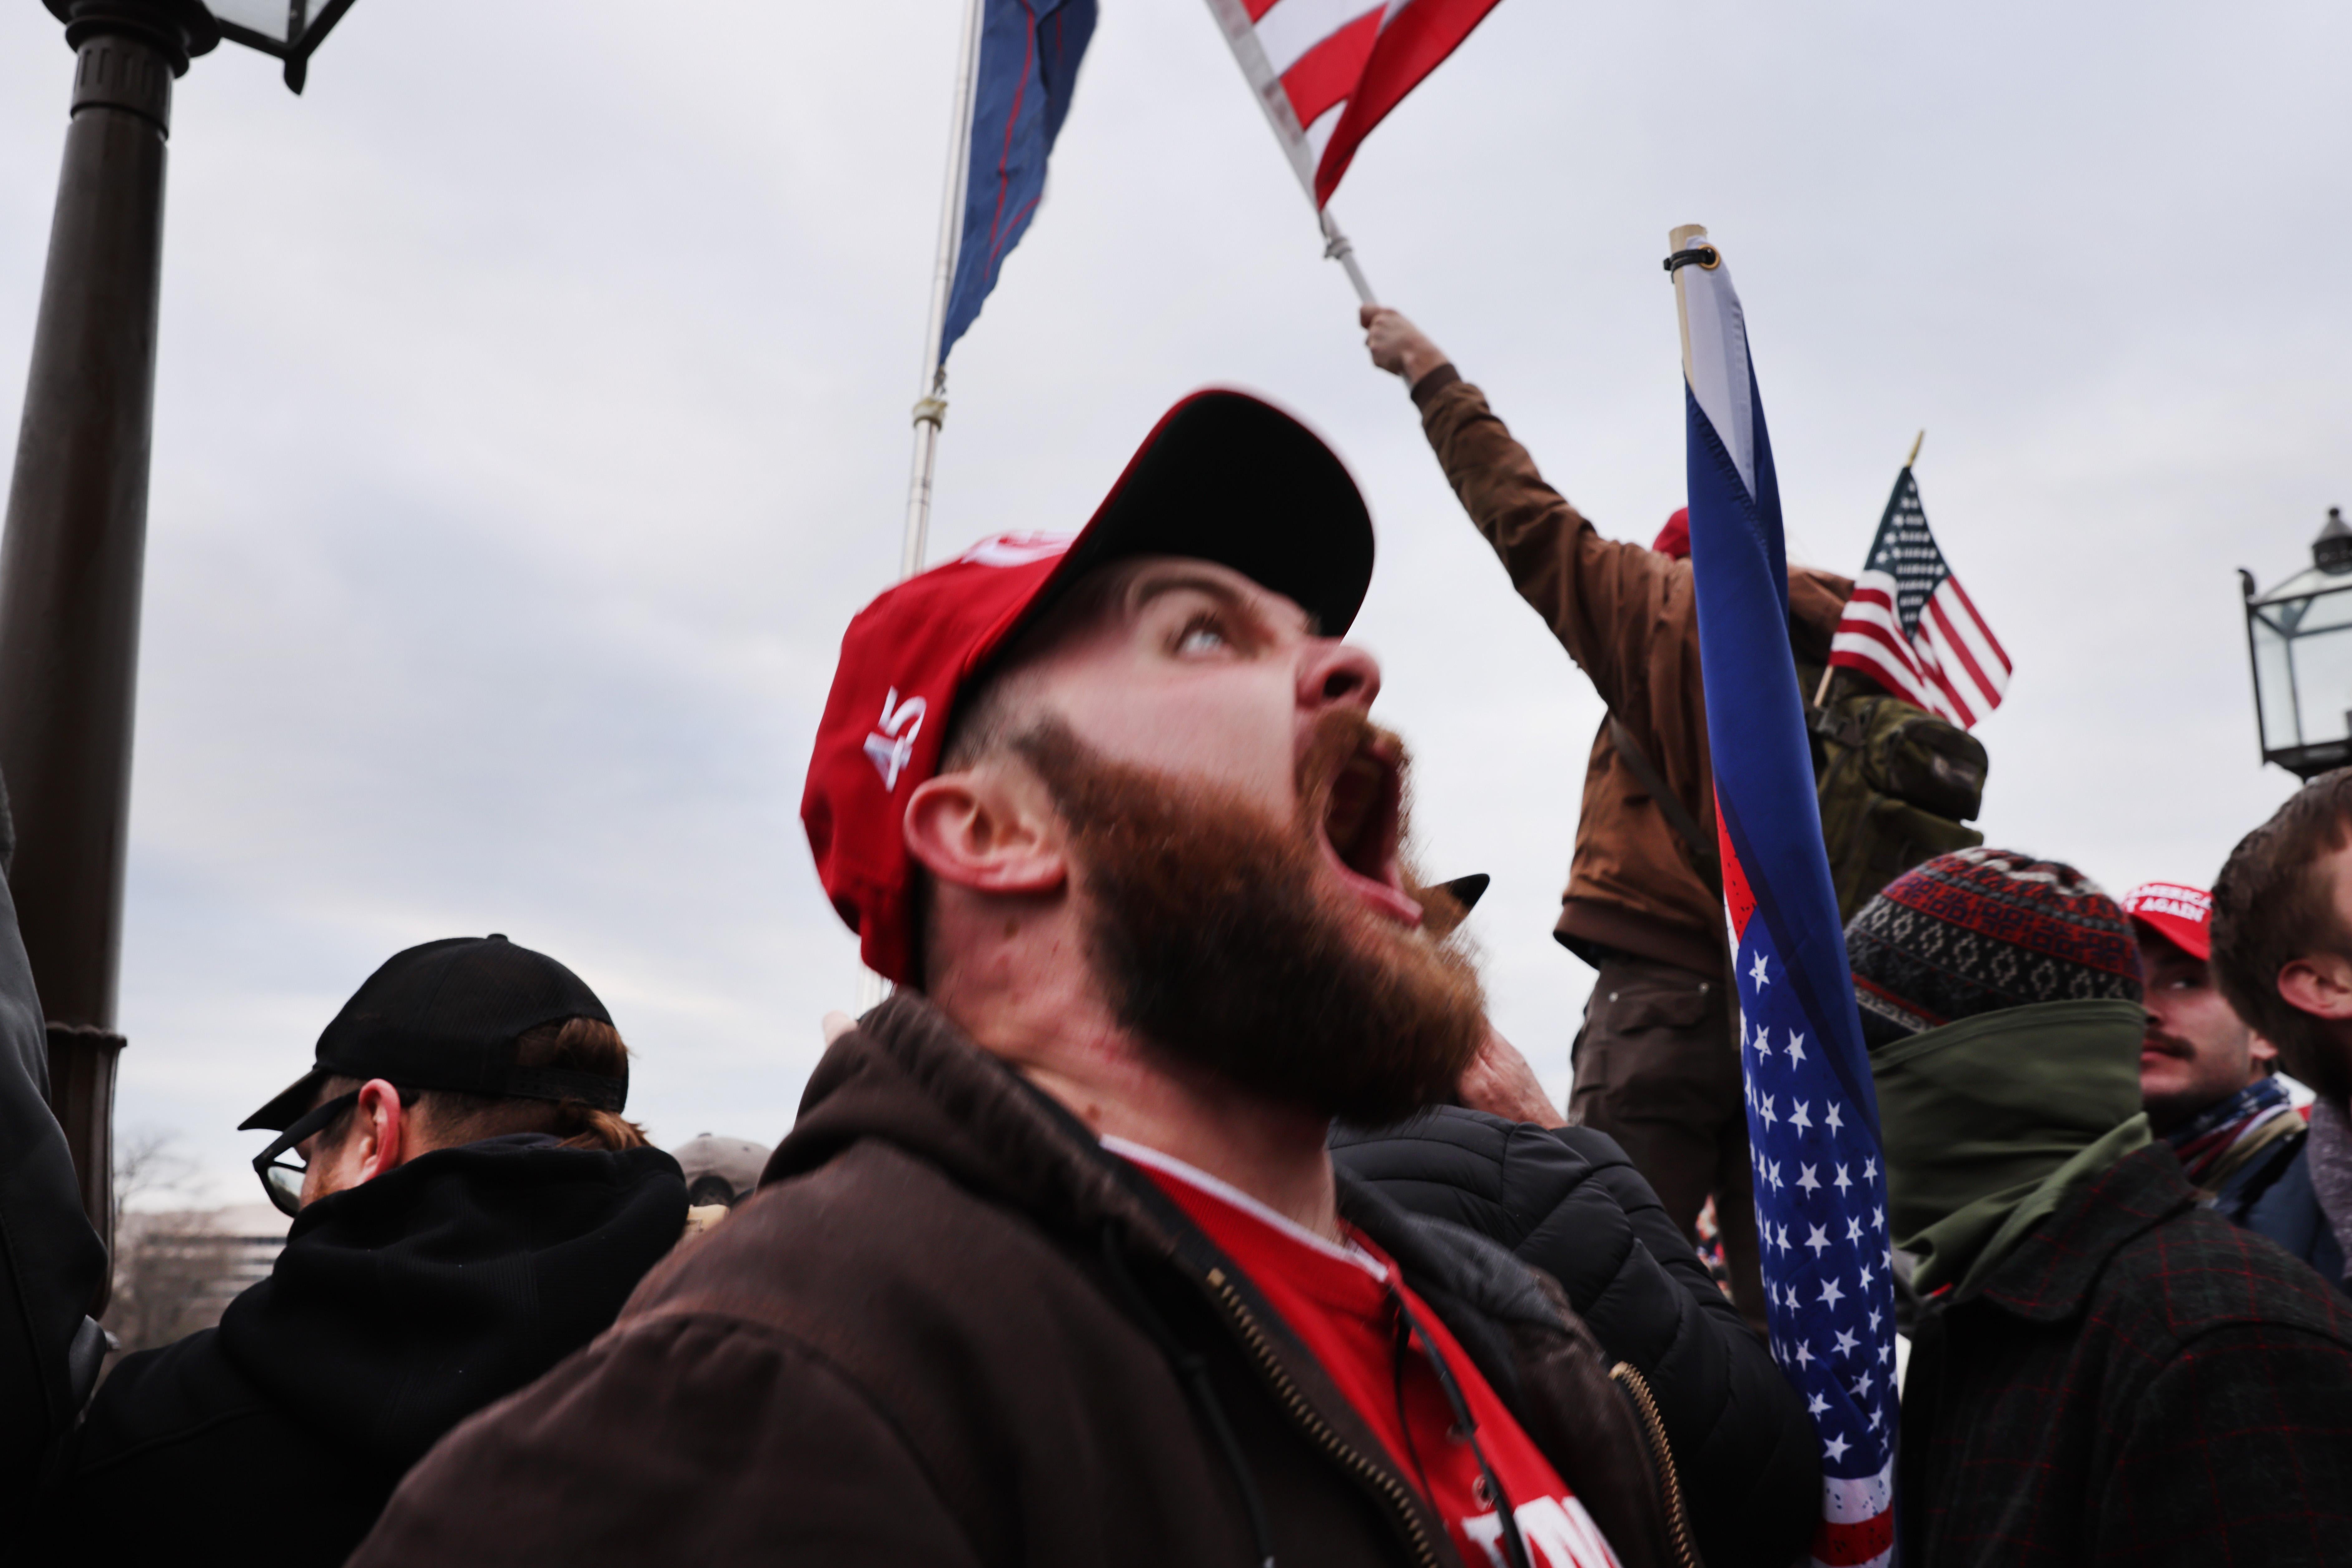 A white man wearing a red 45 hat screams skyward, standing in a crowd of other male Trump supporters, some waving American flags.